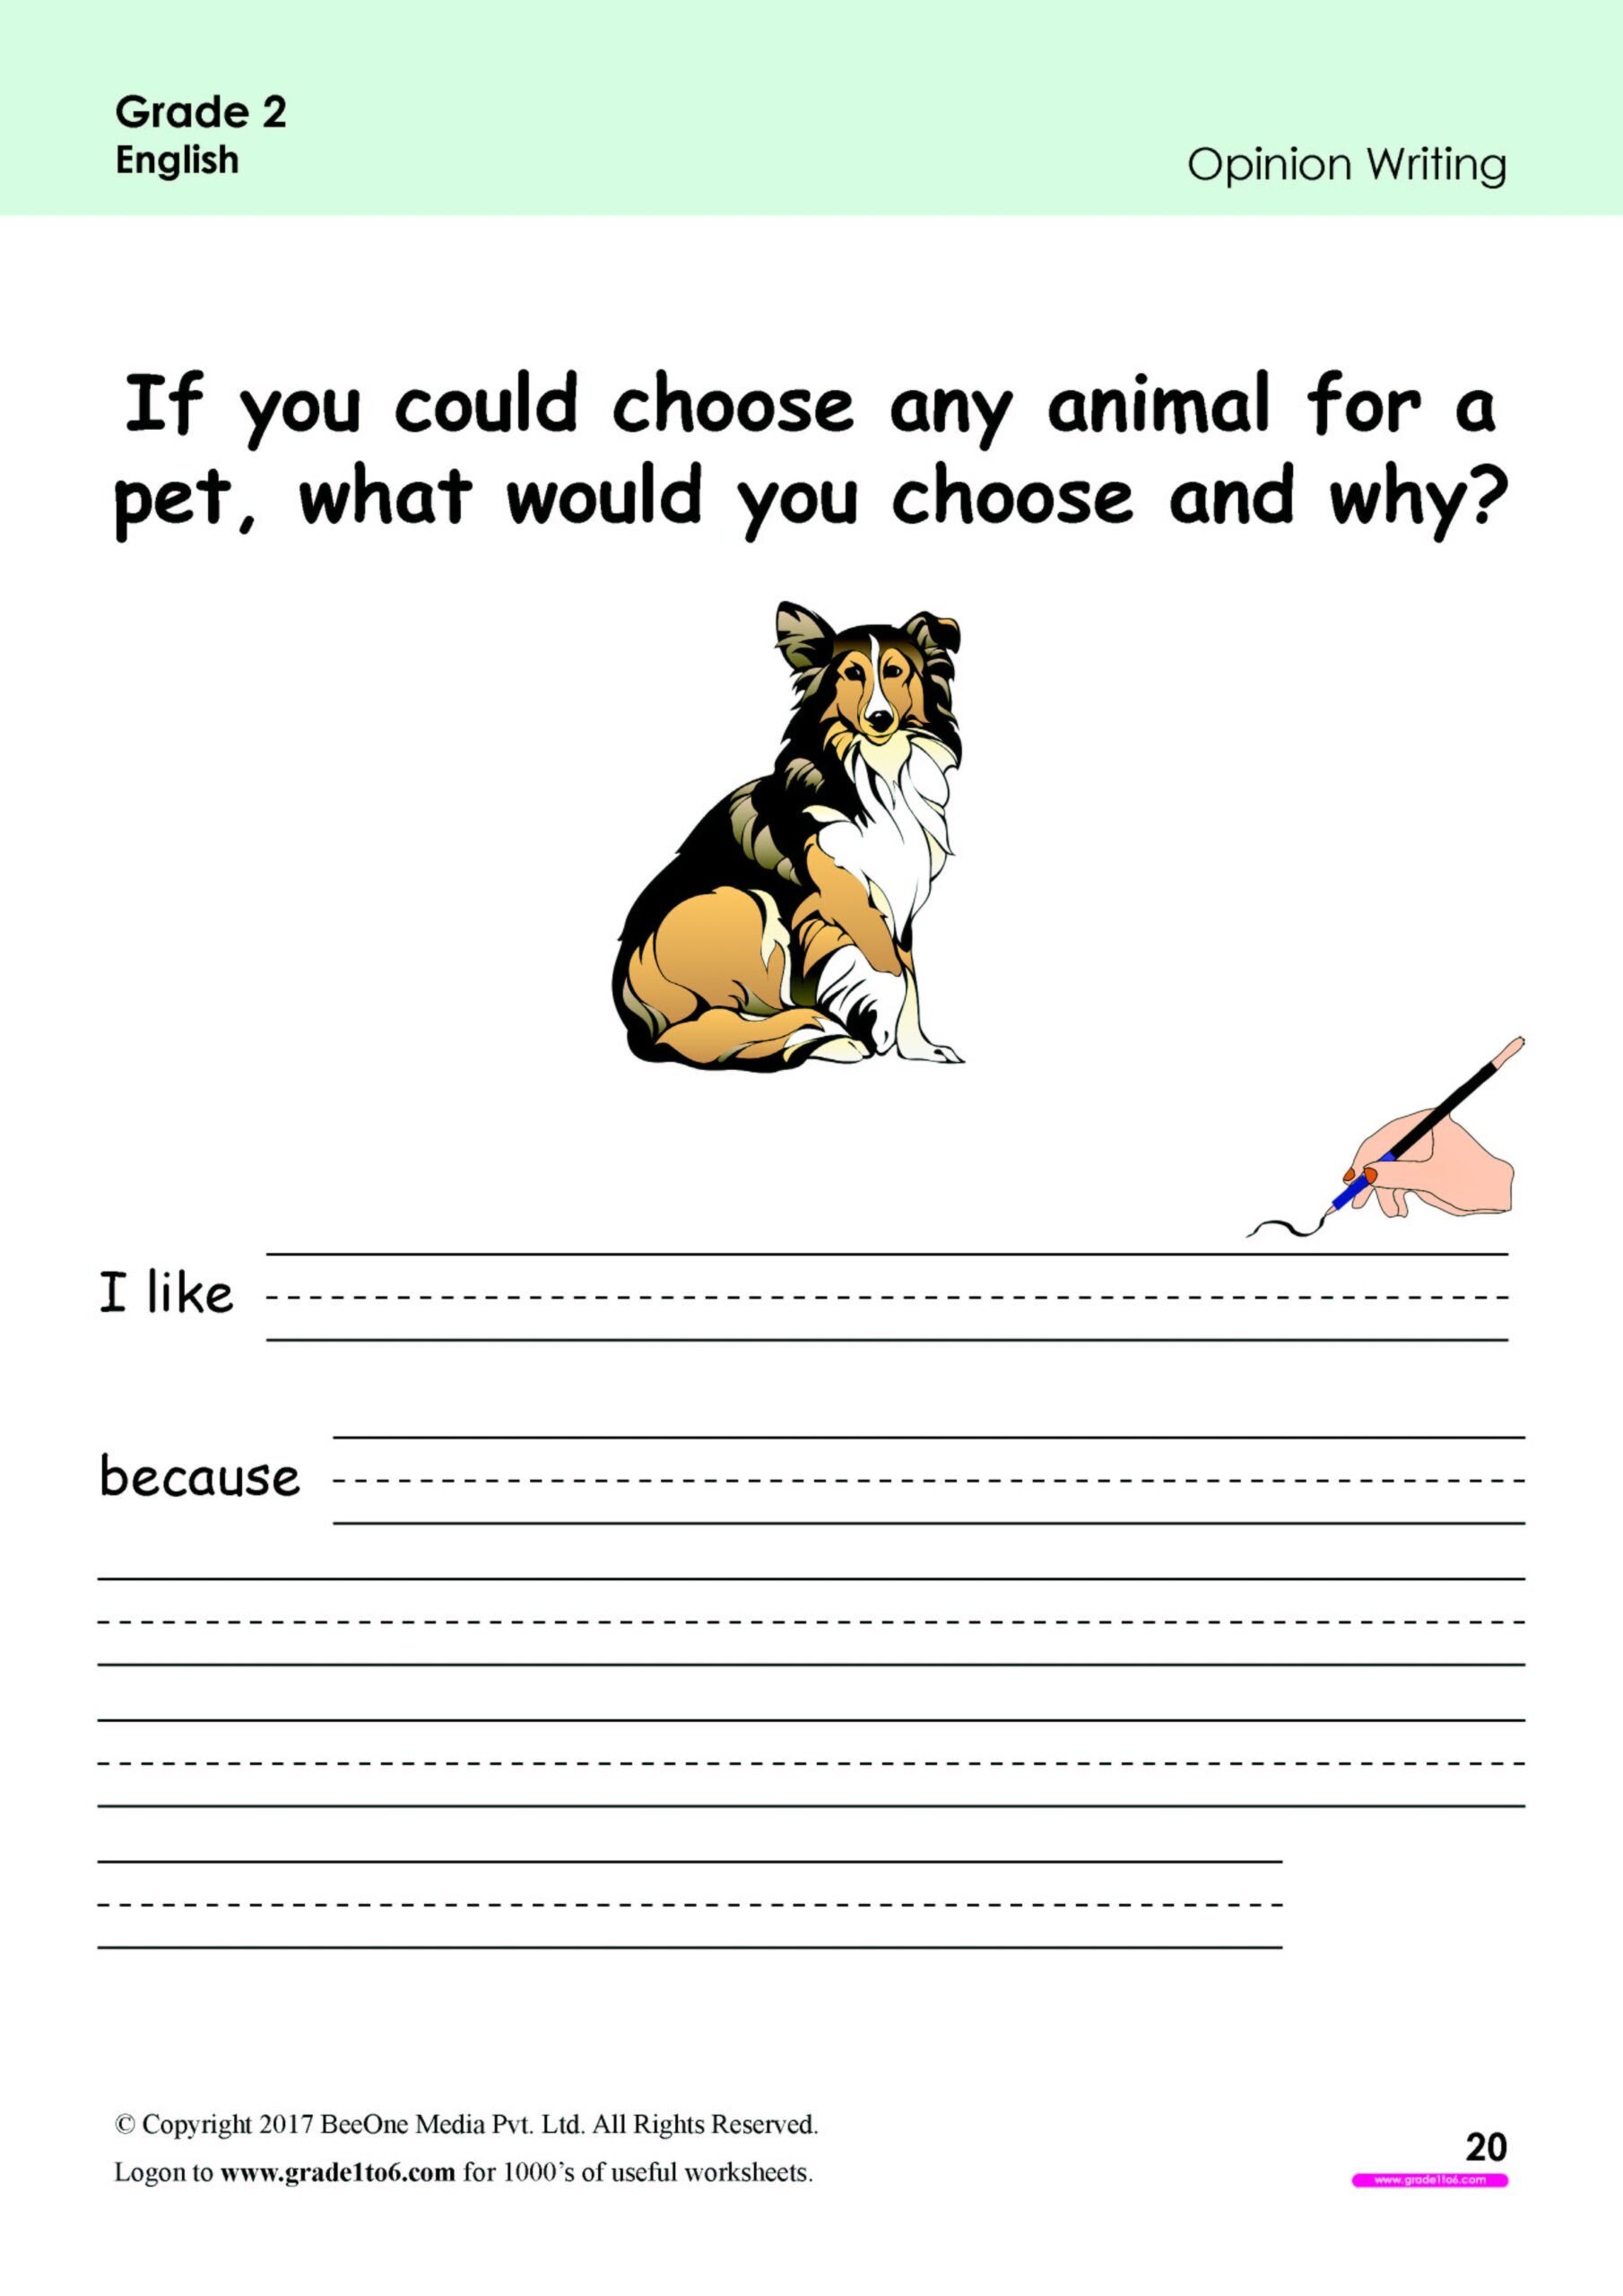 Opinion Writing Worksheets For Grade 2 www grade1to6